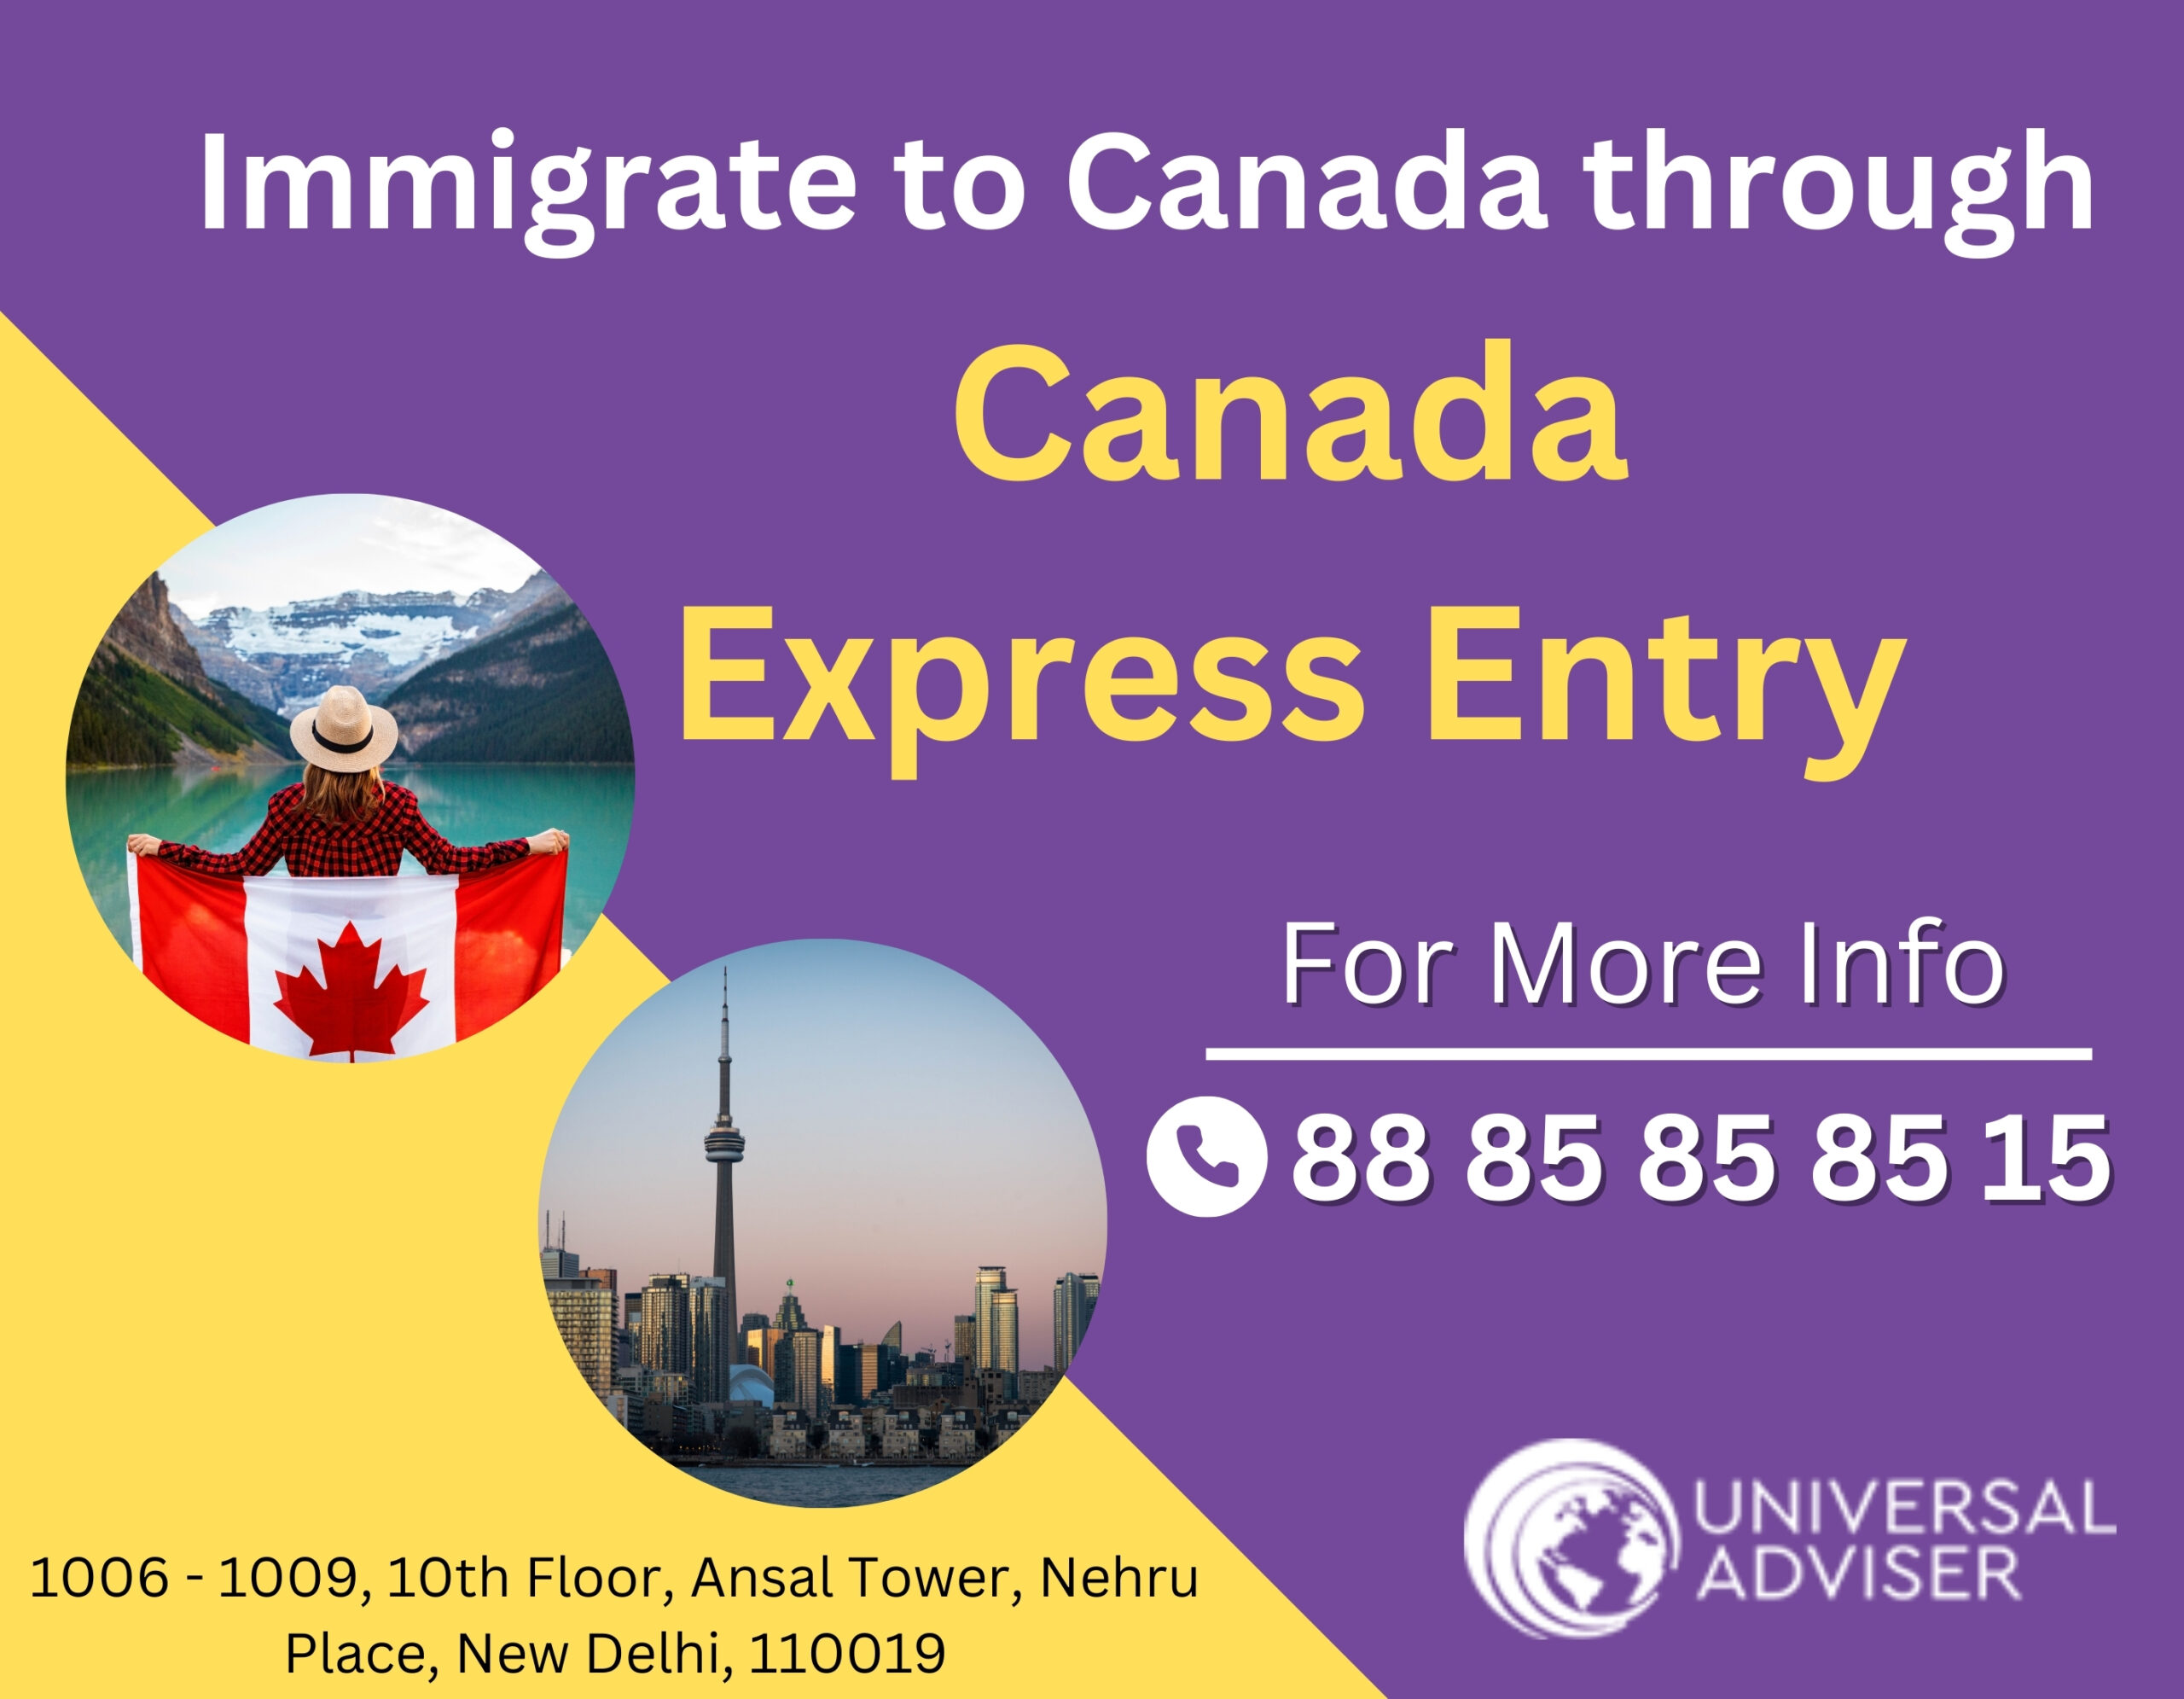 Immigrate to Canada through Express Entry